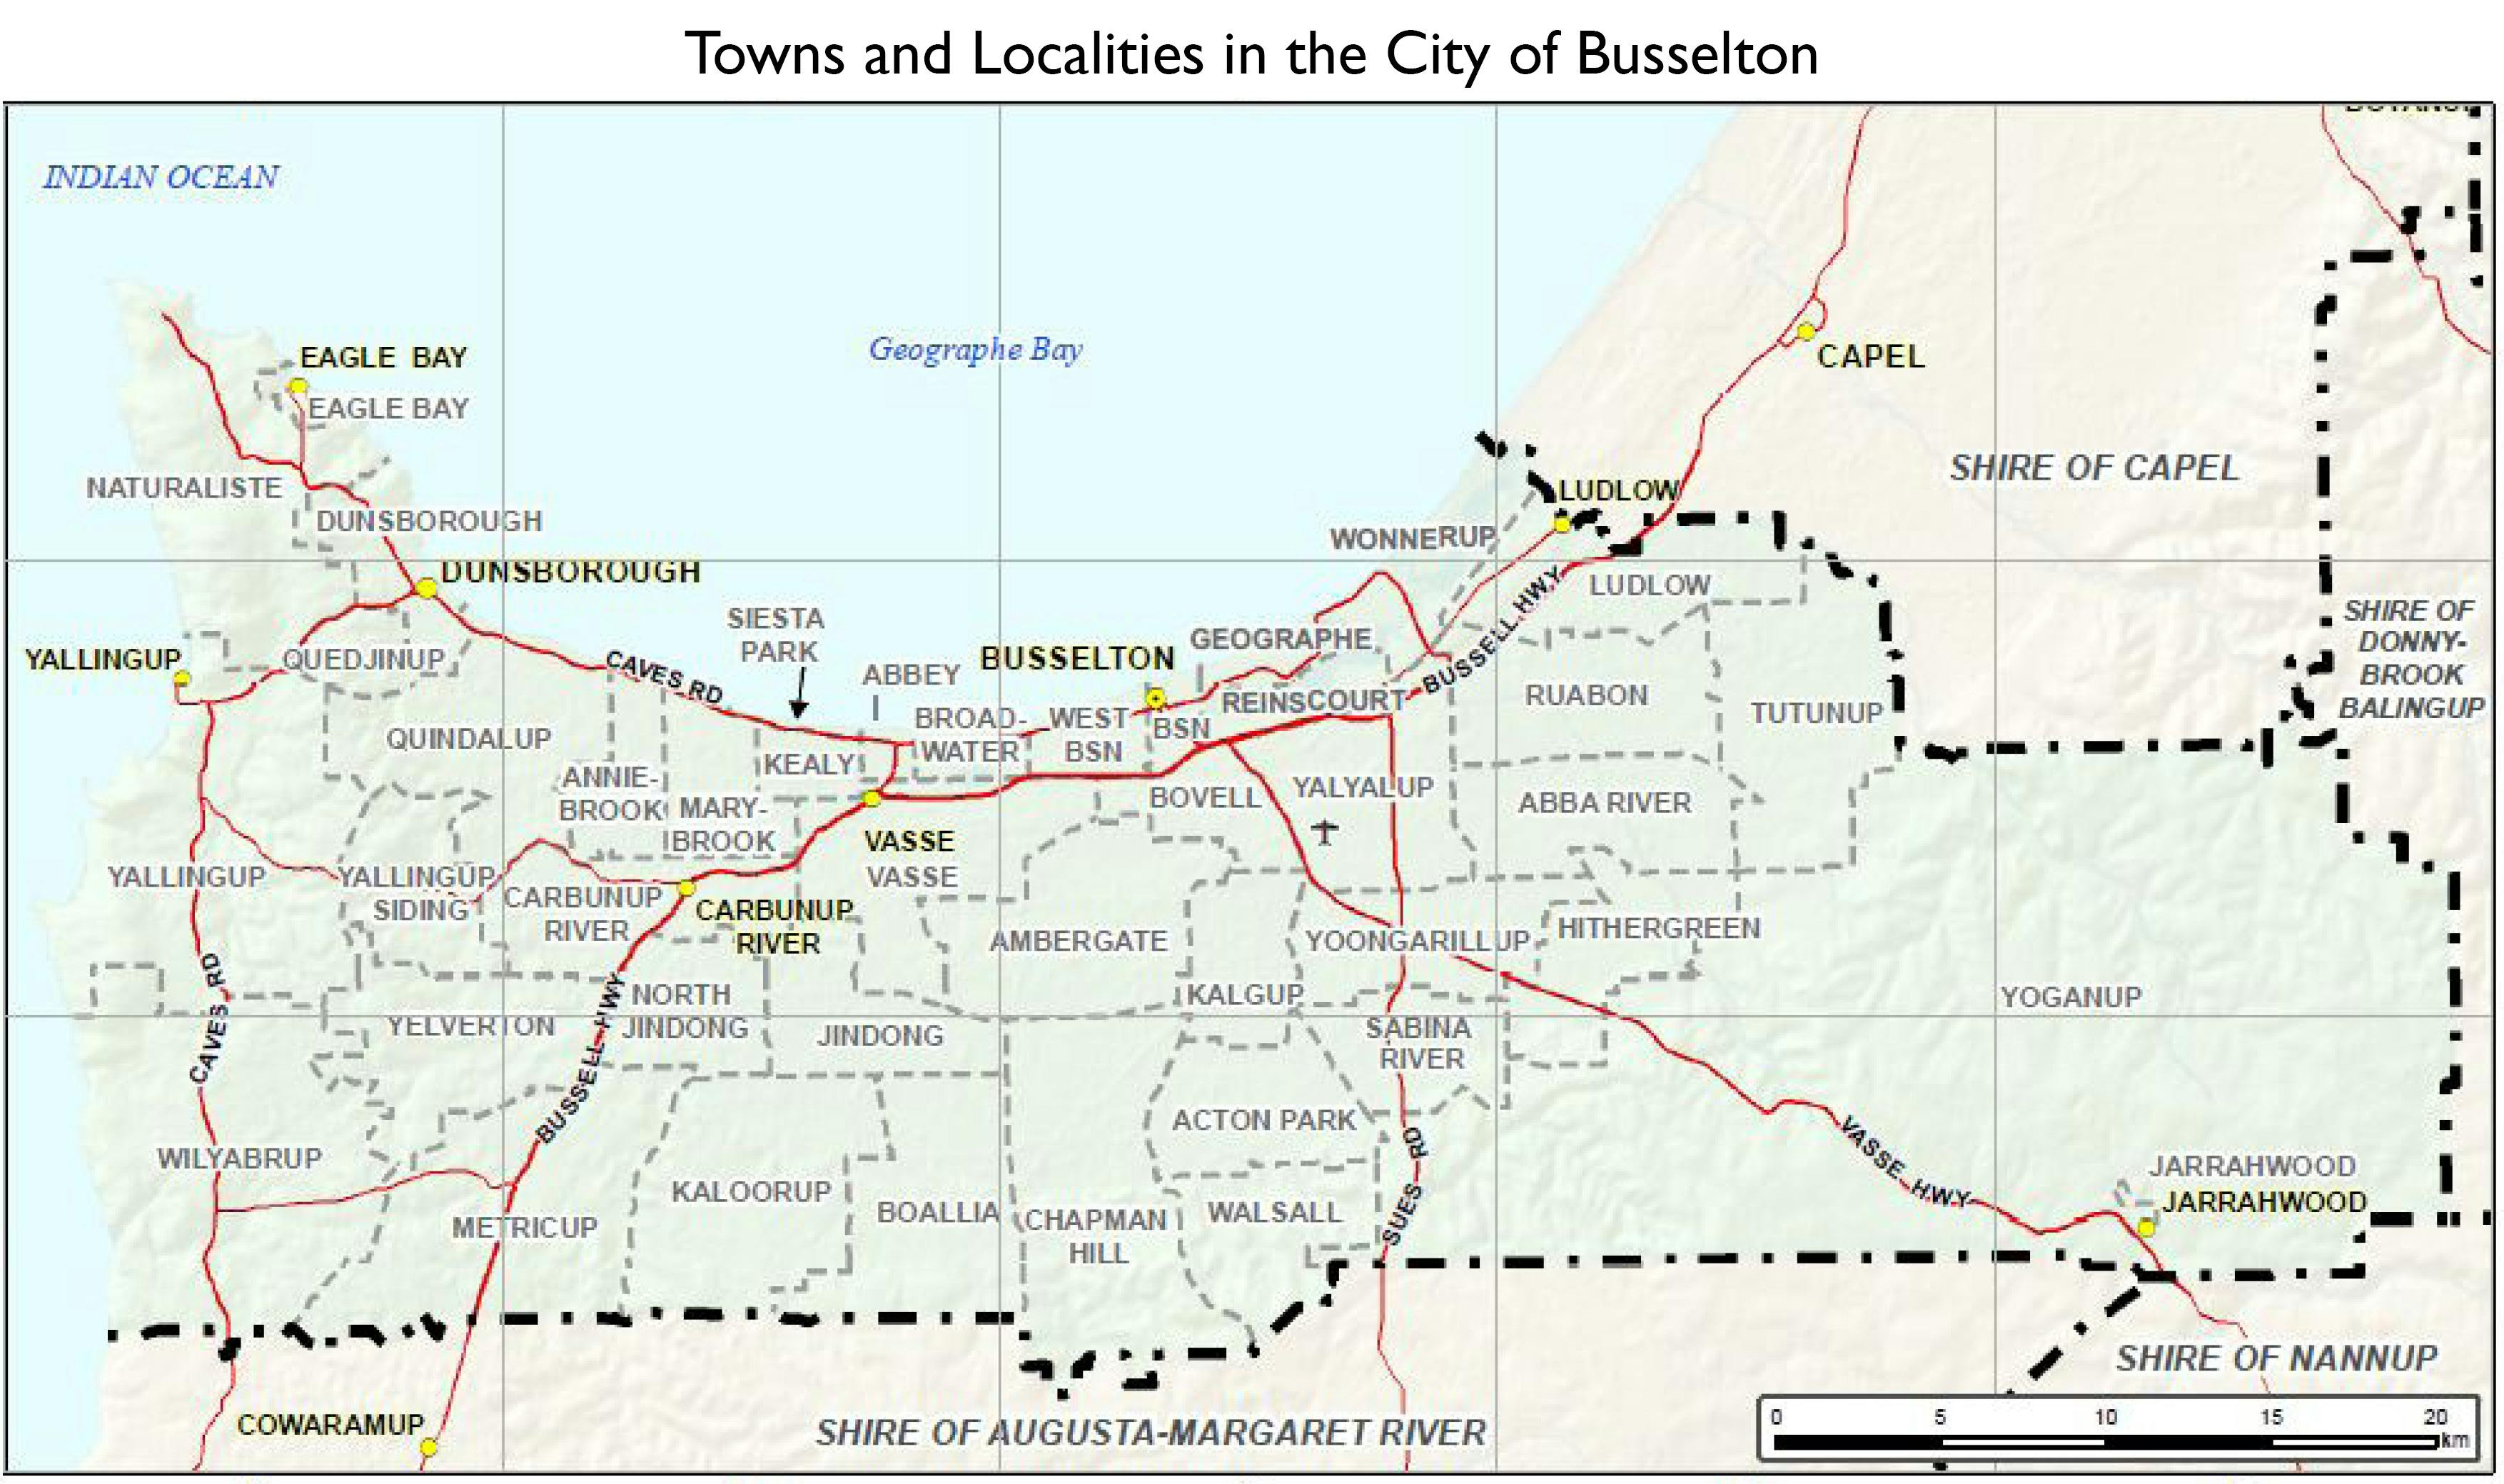 City of Busselton Towns and Localities